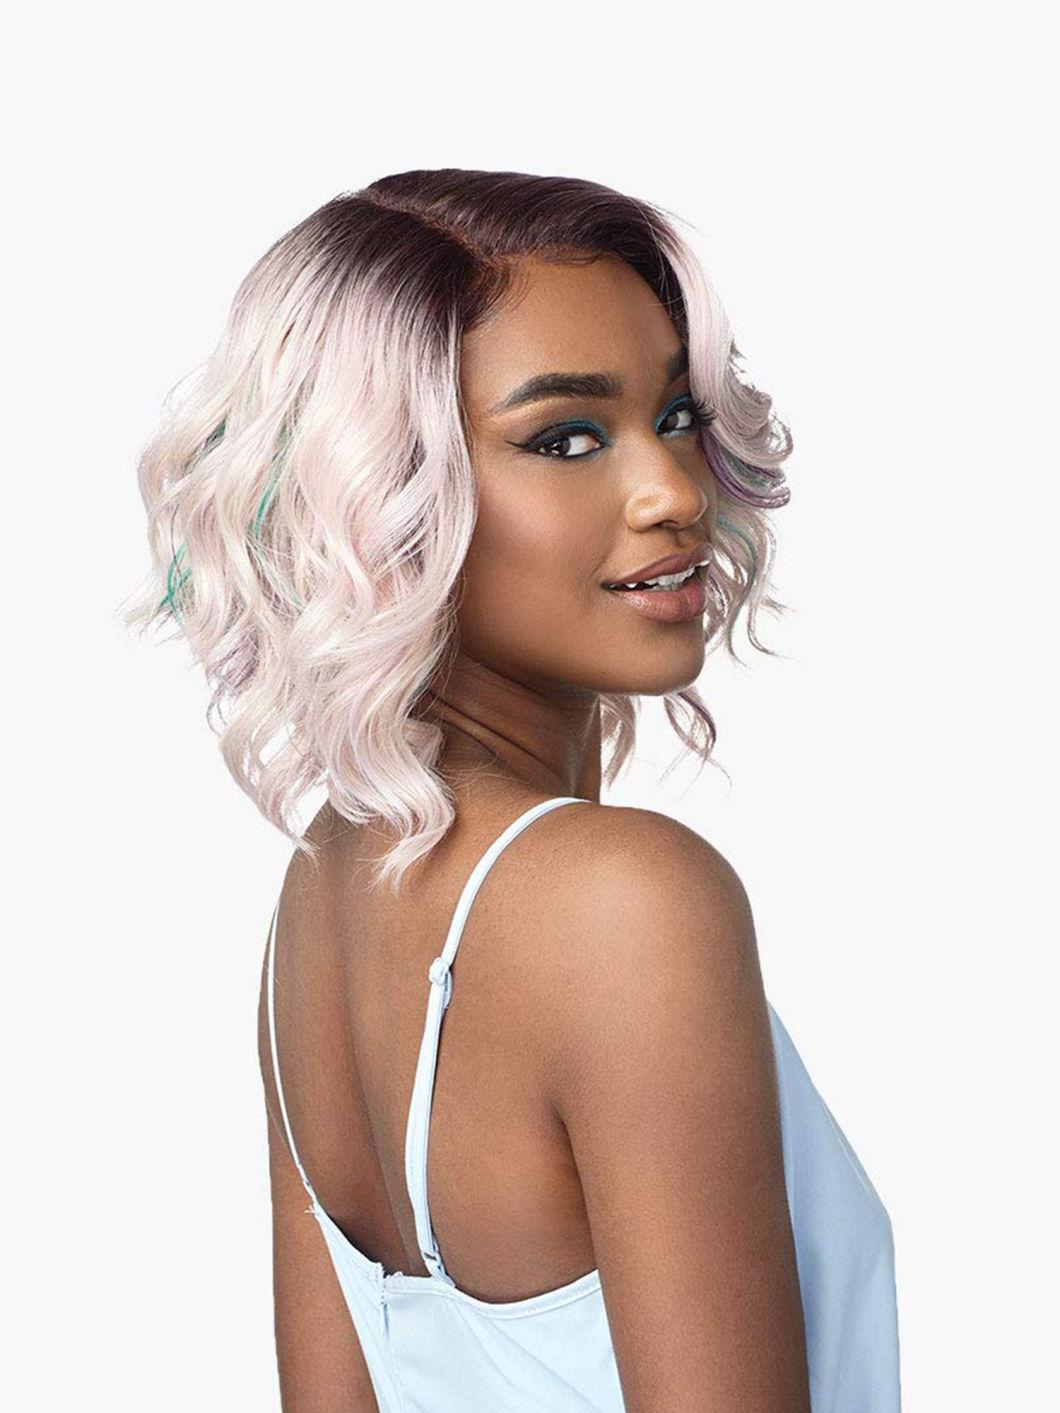 Colored Hair Lace Front Wig Brazilian Human Hair with Closure Wig Remy Human Hair Bob Wig for Women